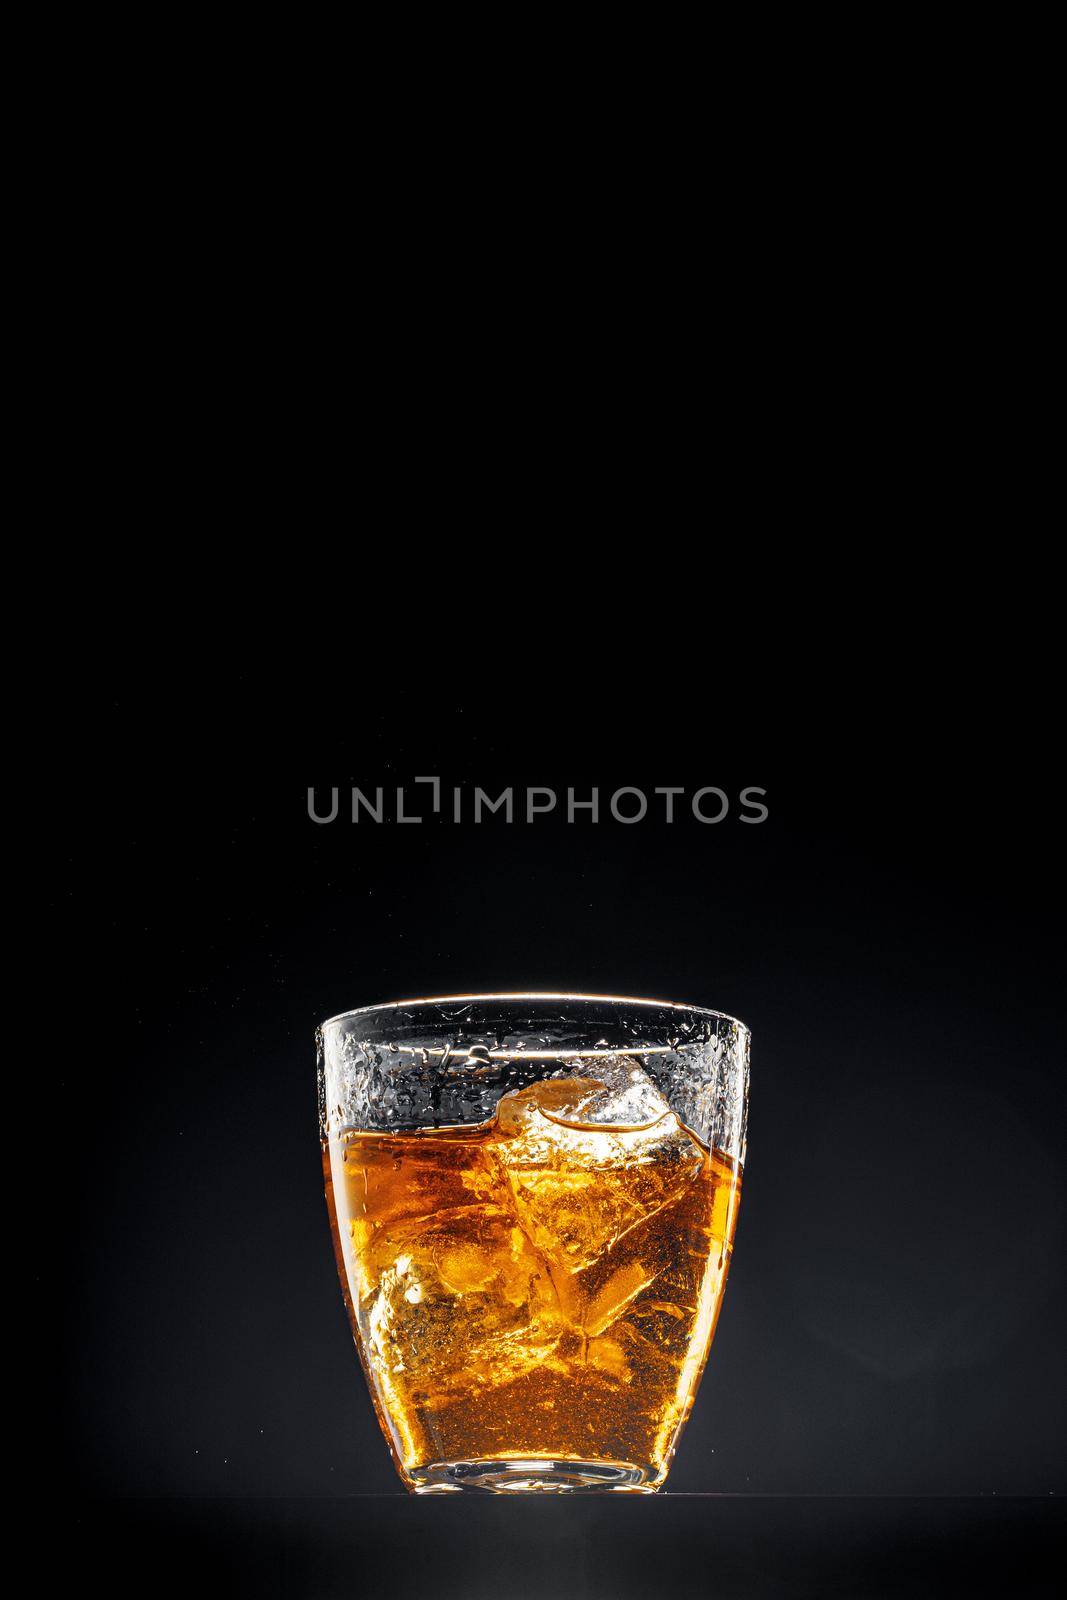 Glass of whisky on black background, copy space by Fabrikasimf